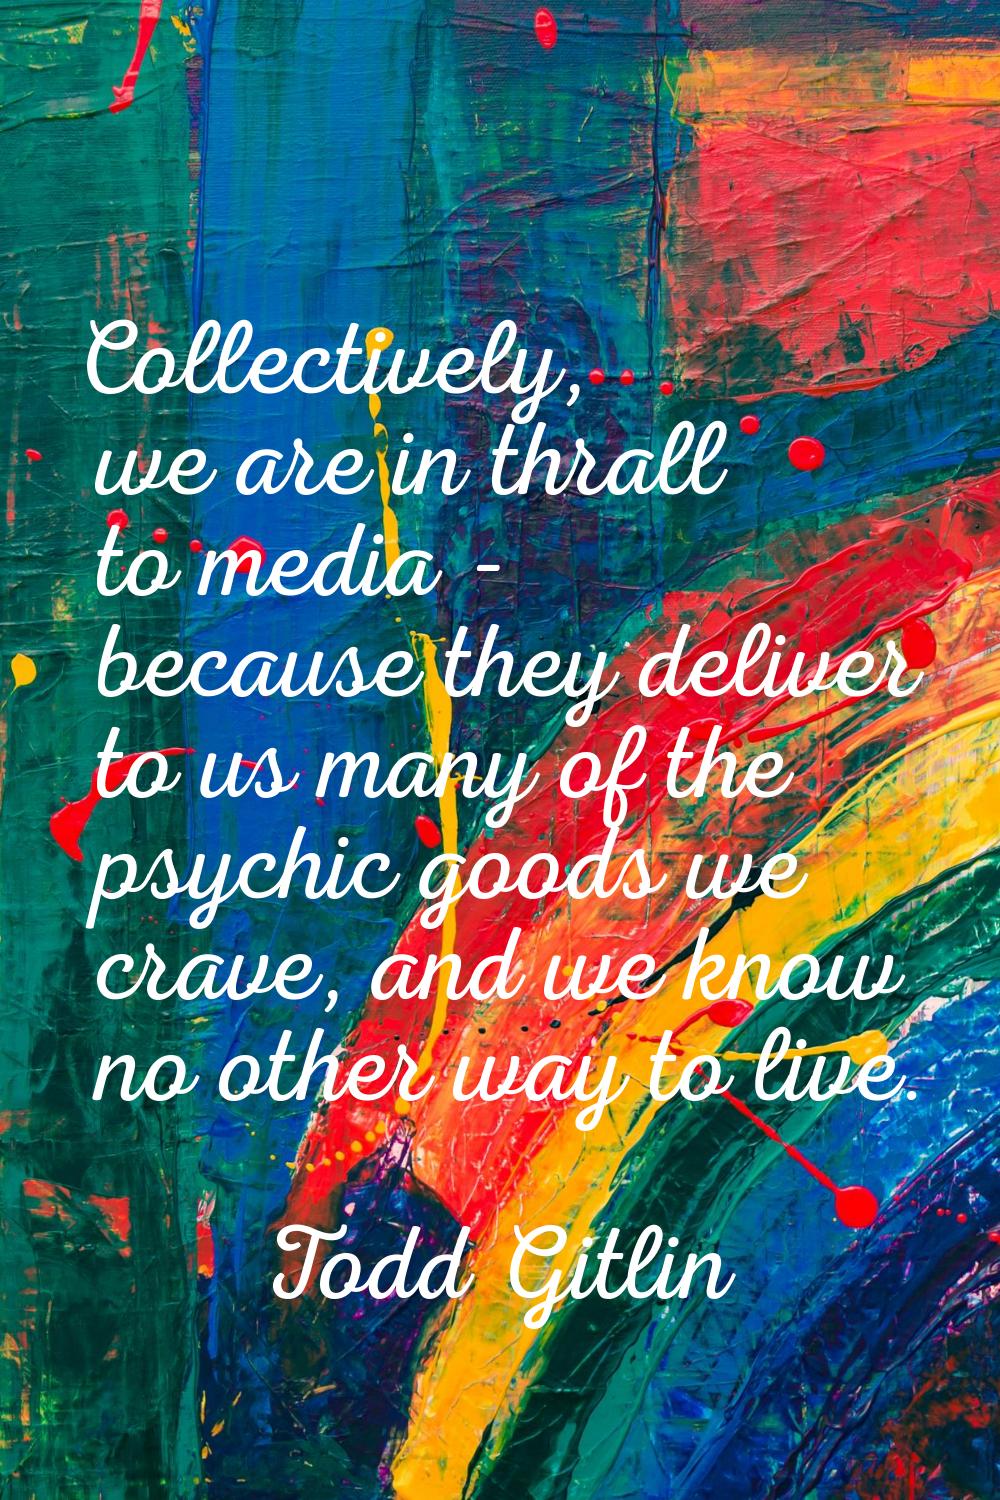 Collectively, we are in thrall to media - because they deliver to us many of the psychic goods we c